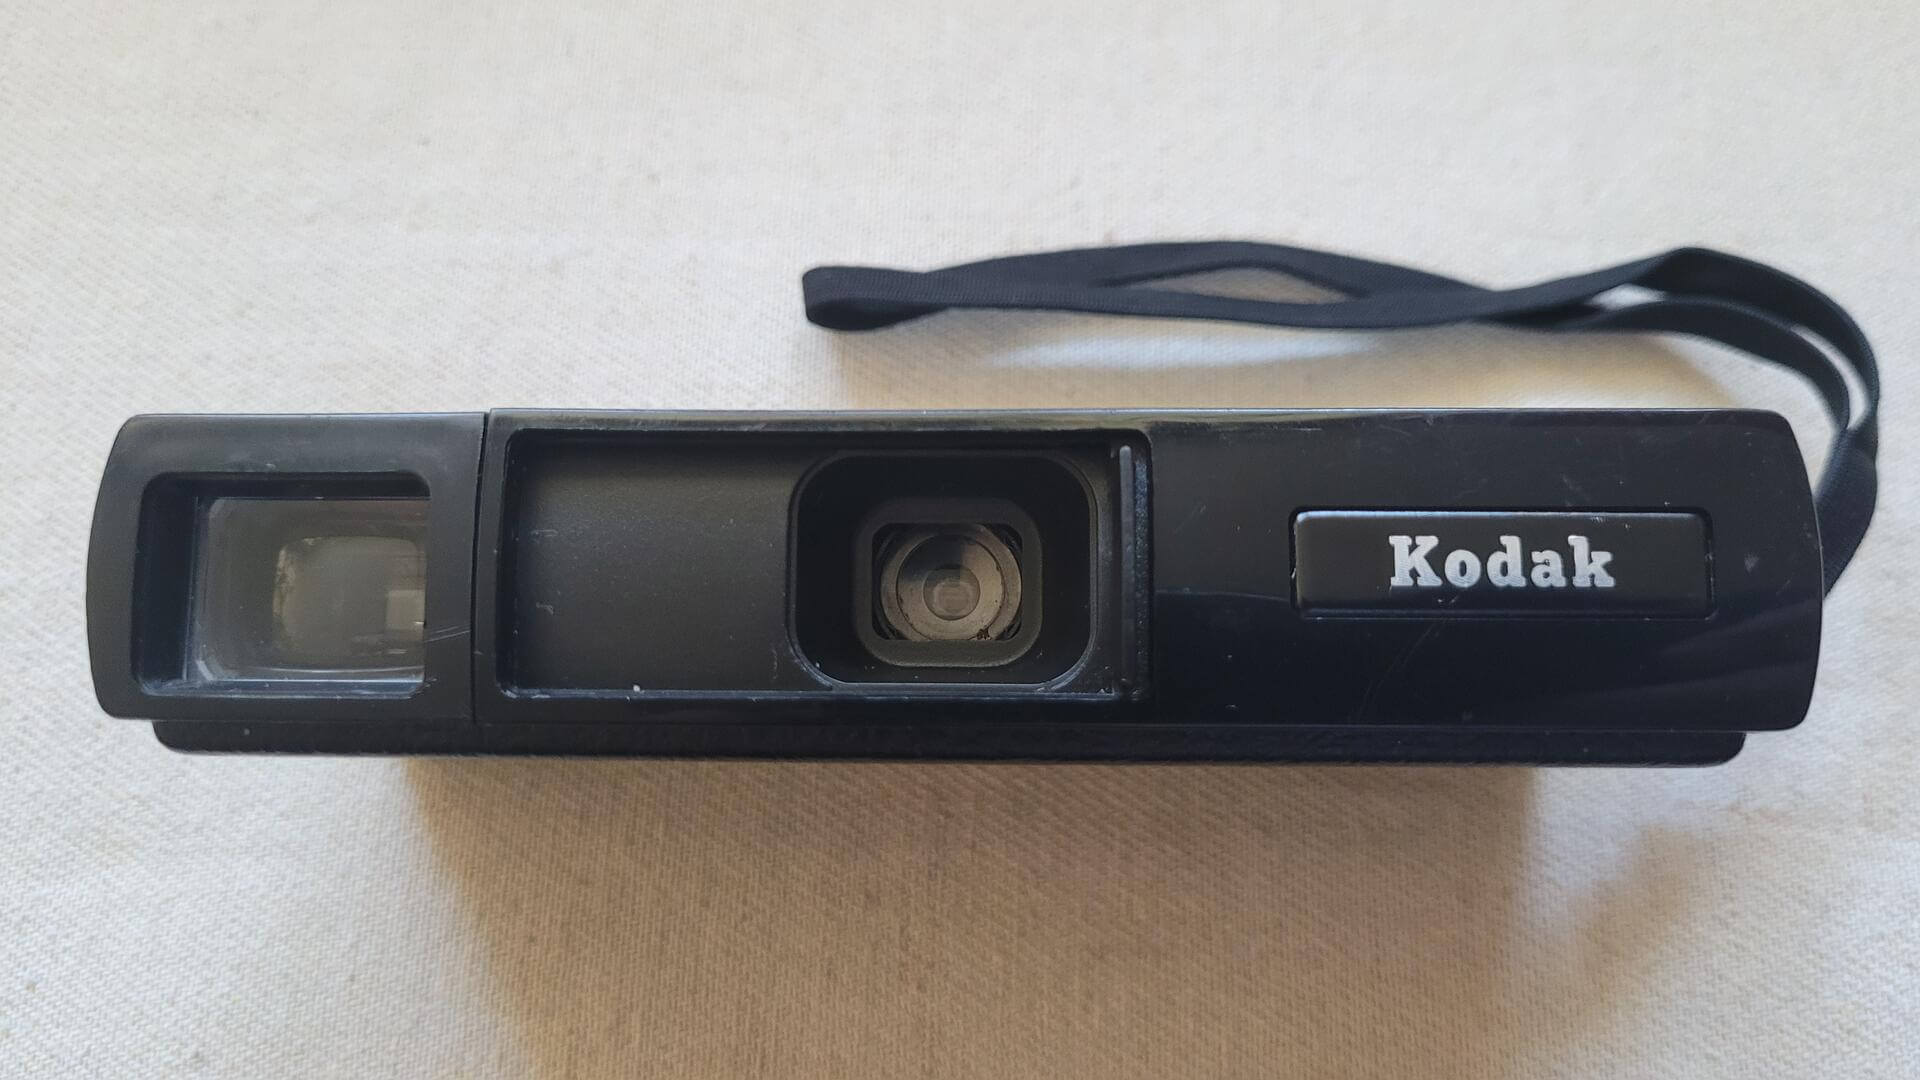 Classic vintage 1970s Kodak Pocket Instamatic 20 photo 110 film camera. Rare made in Canada version collectible photographic equipment and cameras